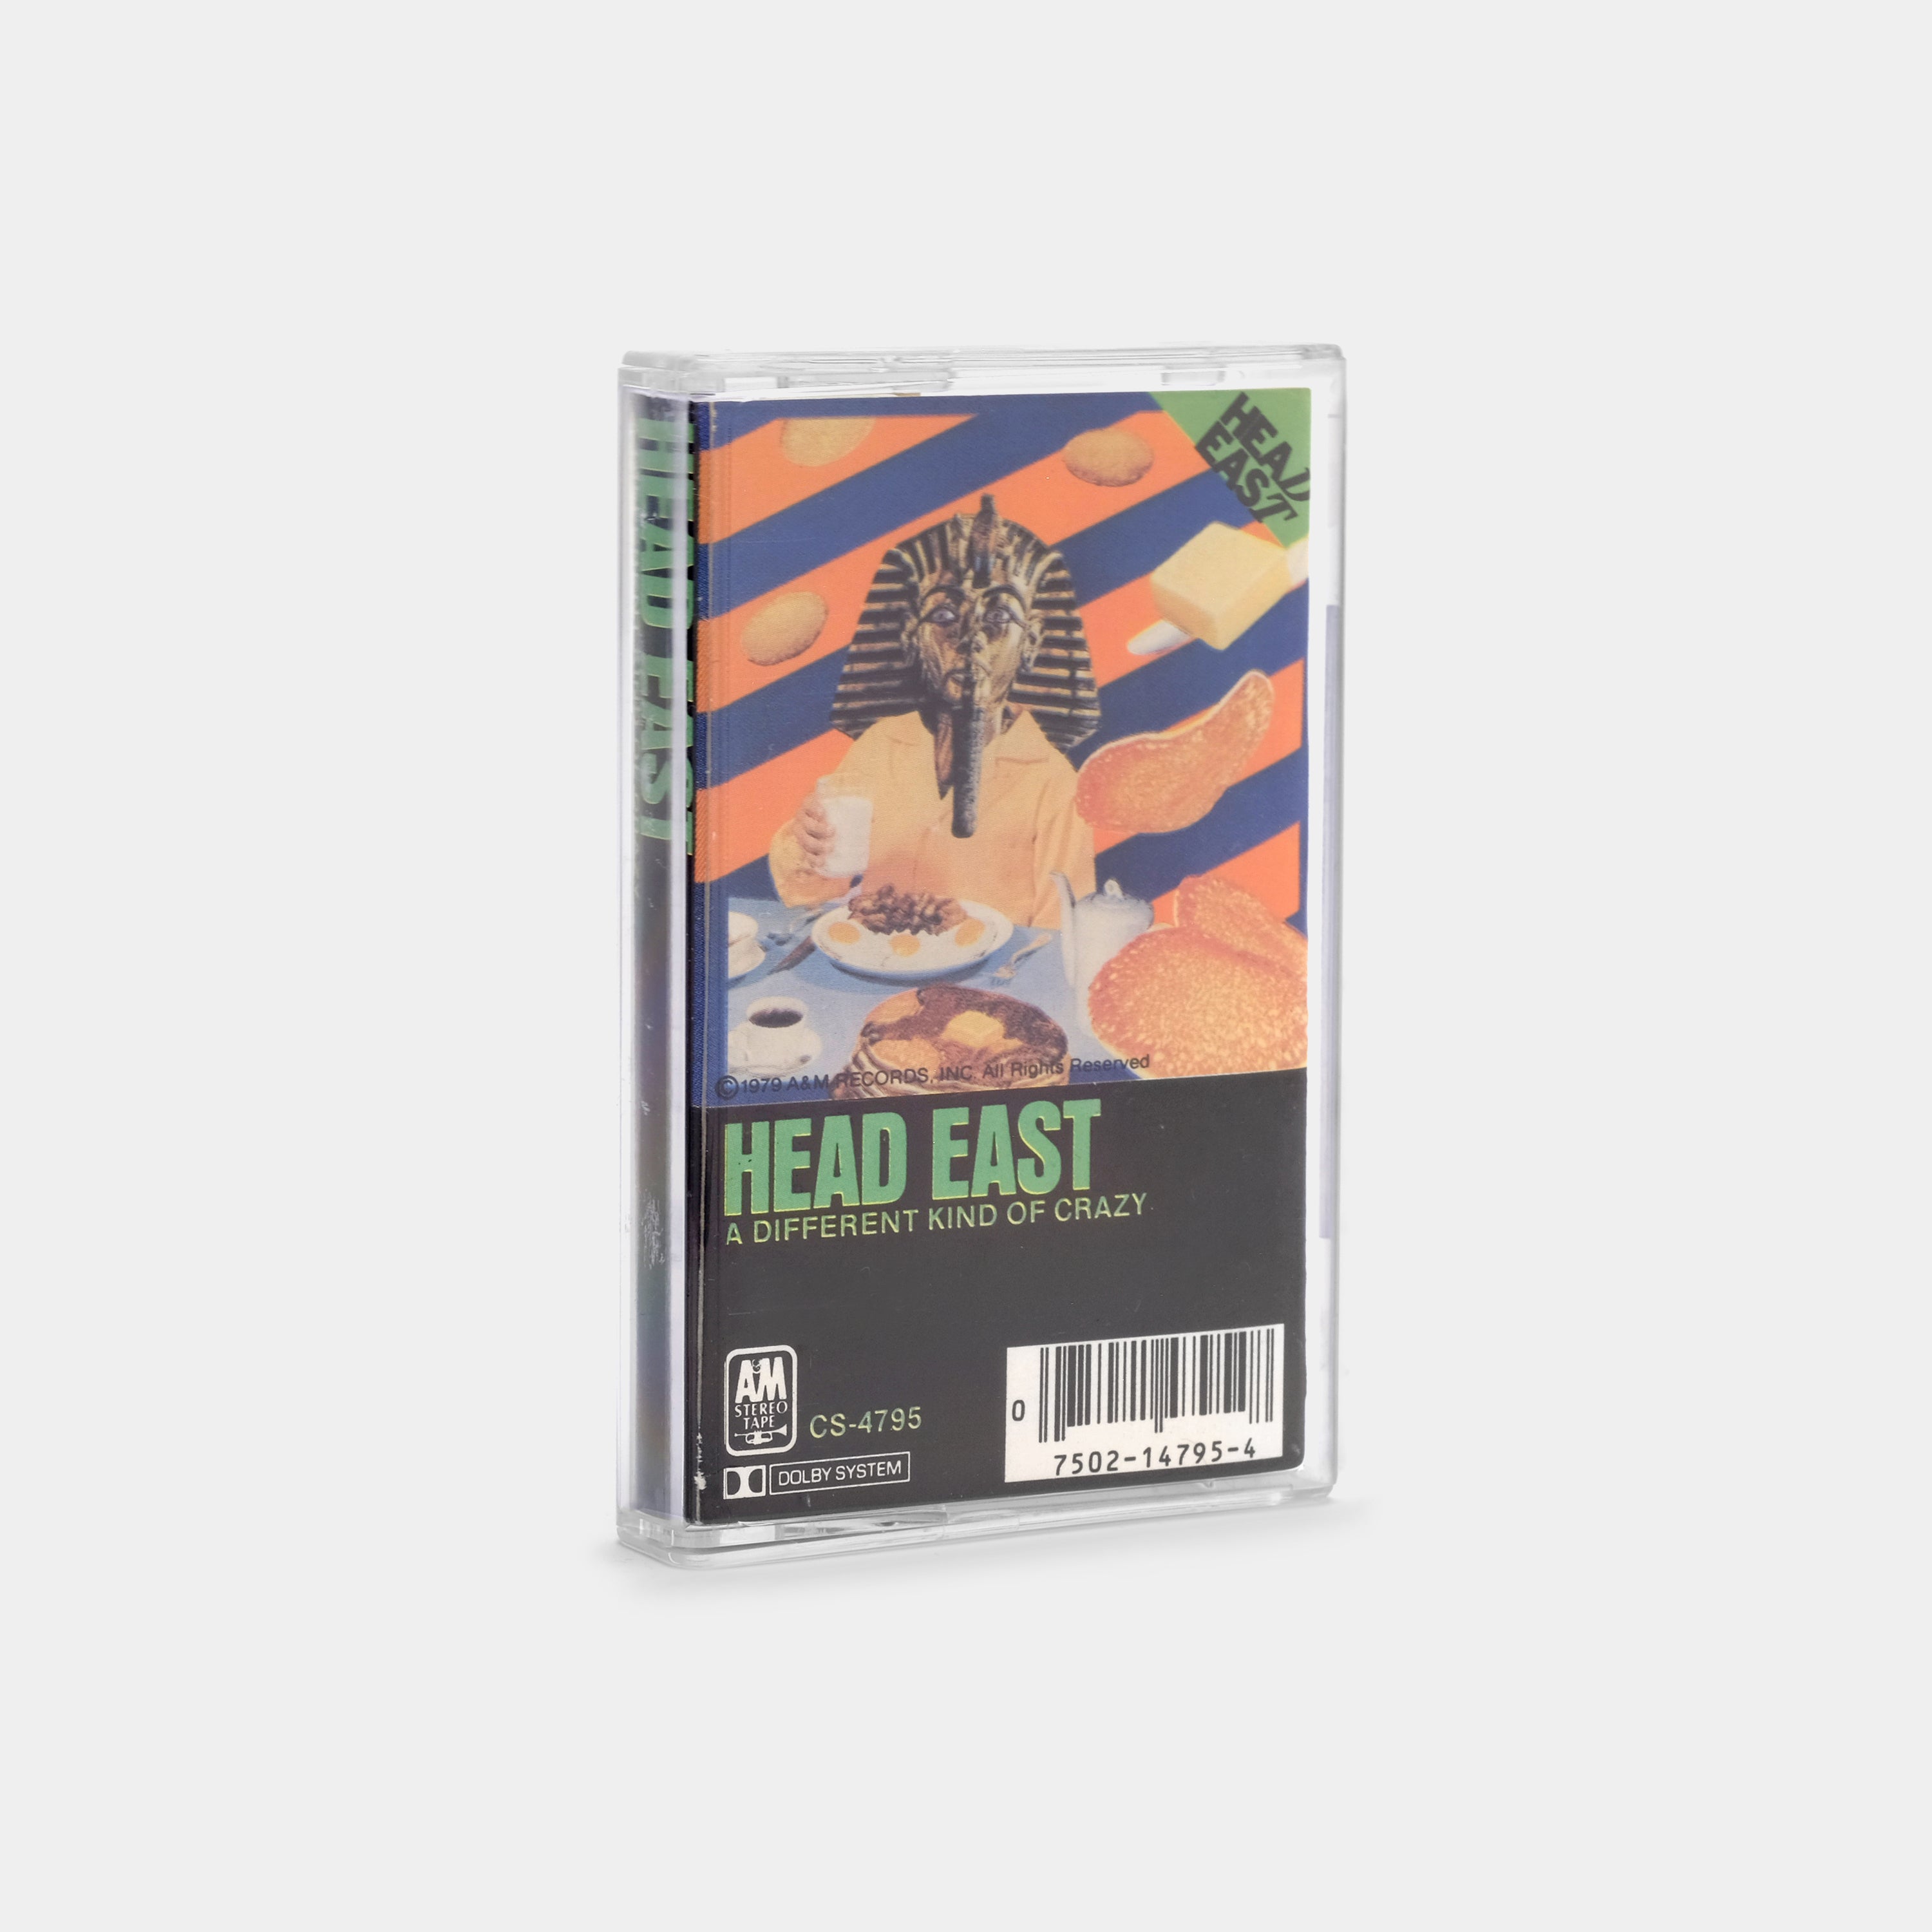 Head East - A Different Kind Of Crazy Cassette Tape